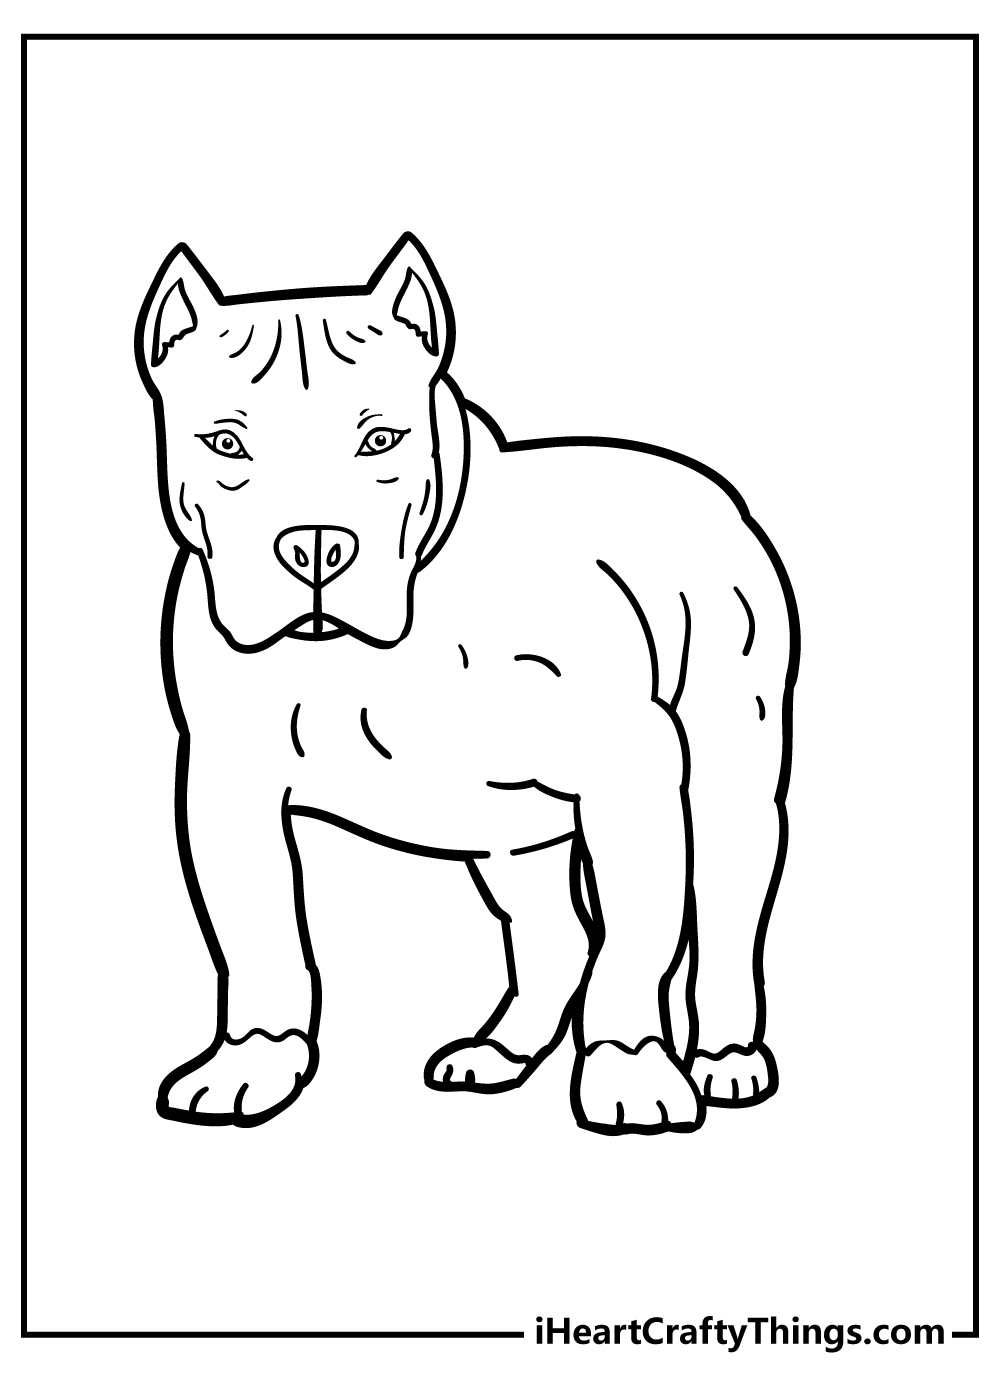 Pitbull Coloring Pages for preschoolers free printable